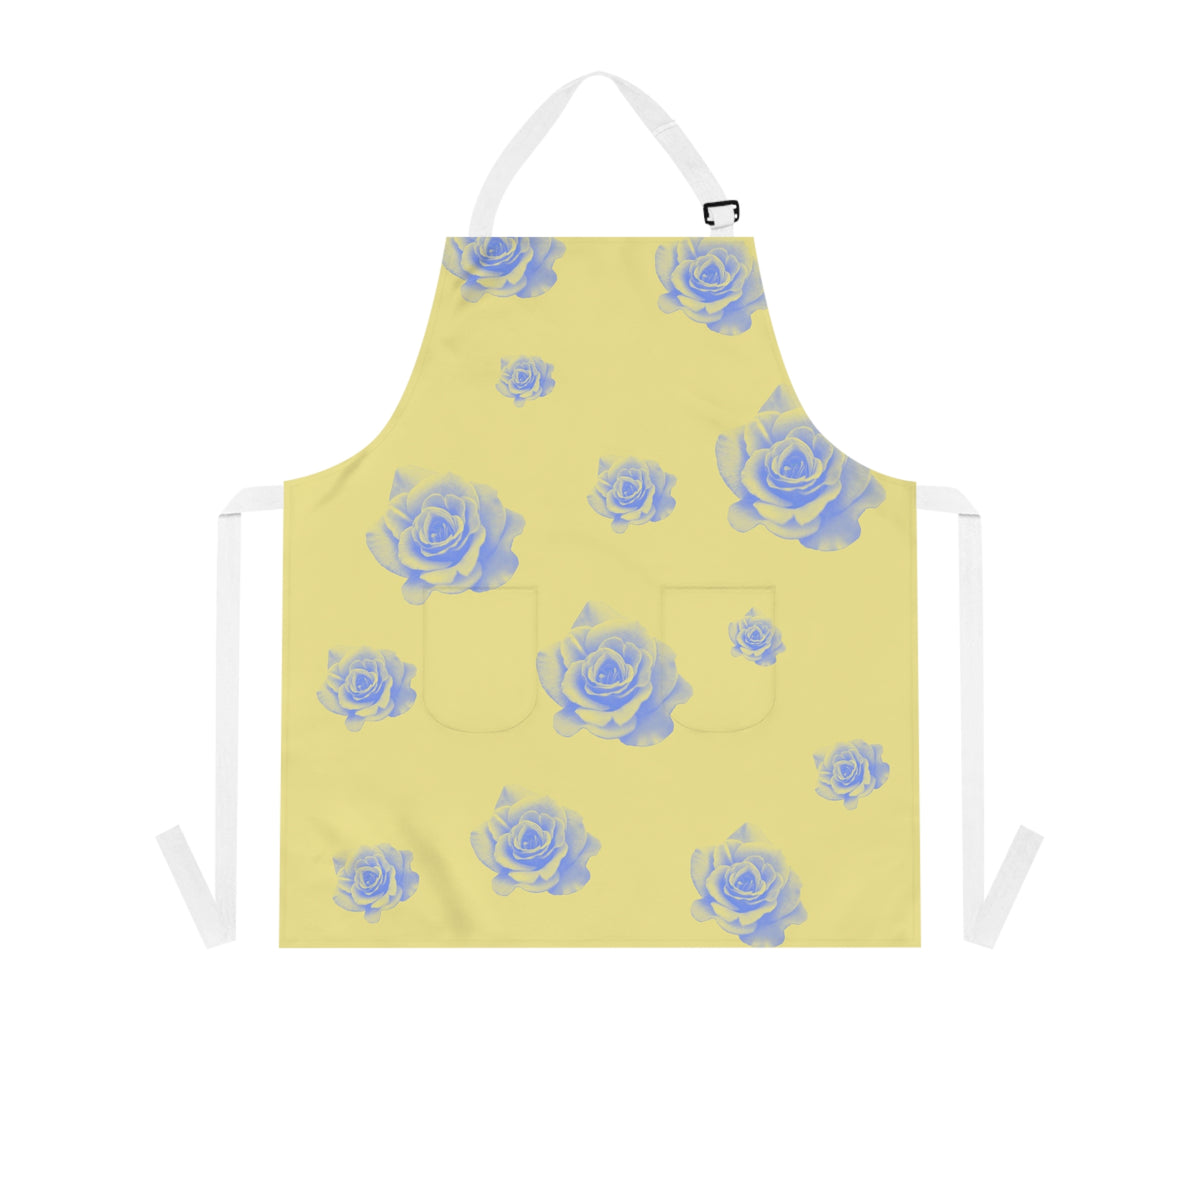 front view of grilling apron with a yellow and blue rose pattern on it and white straps